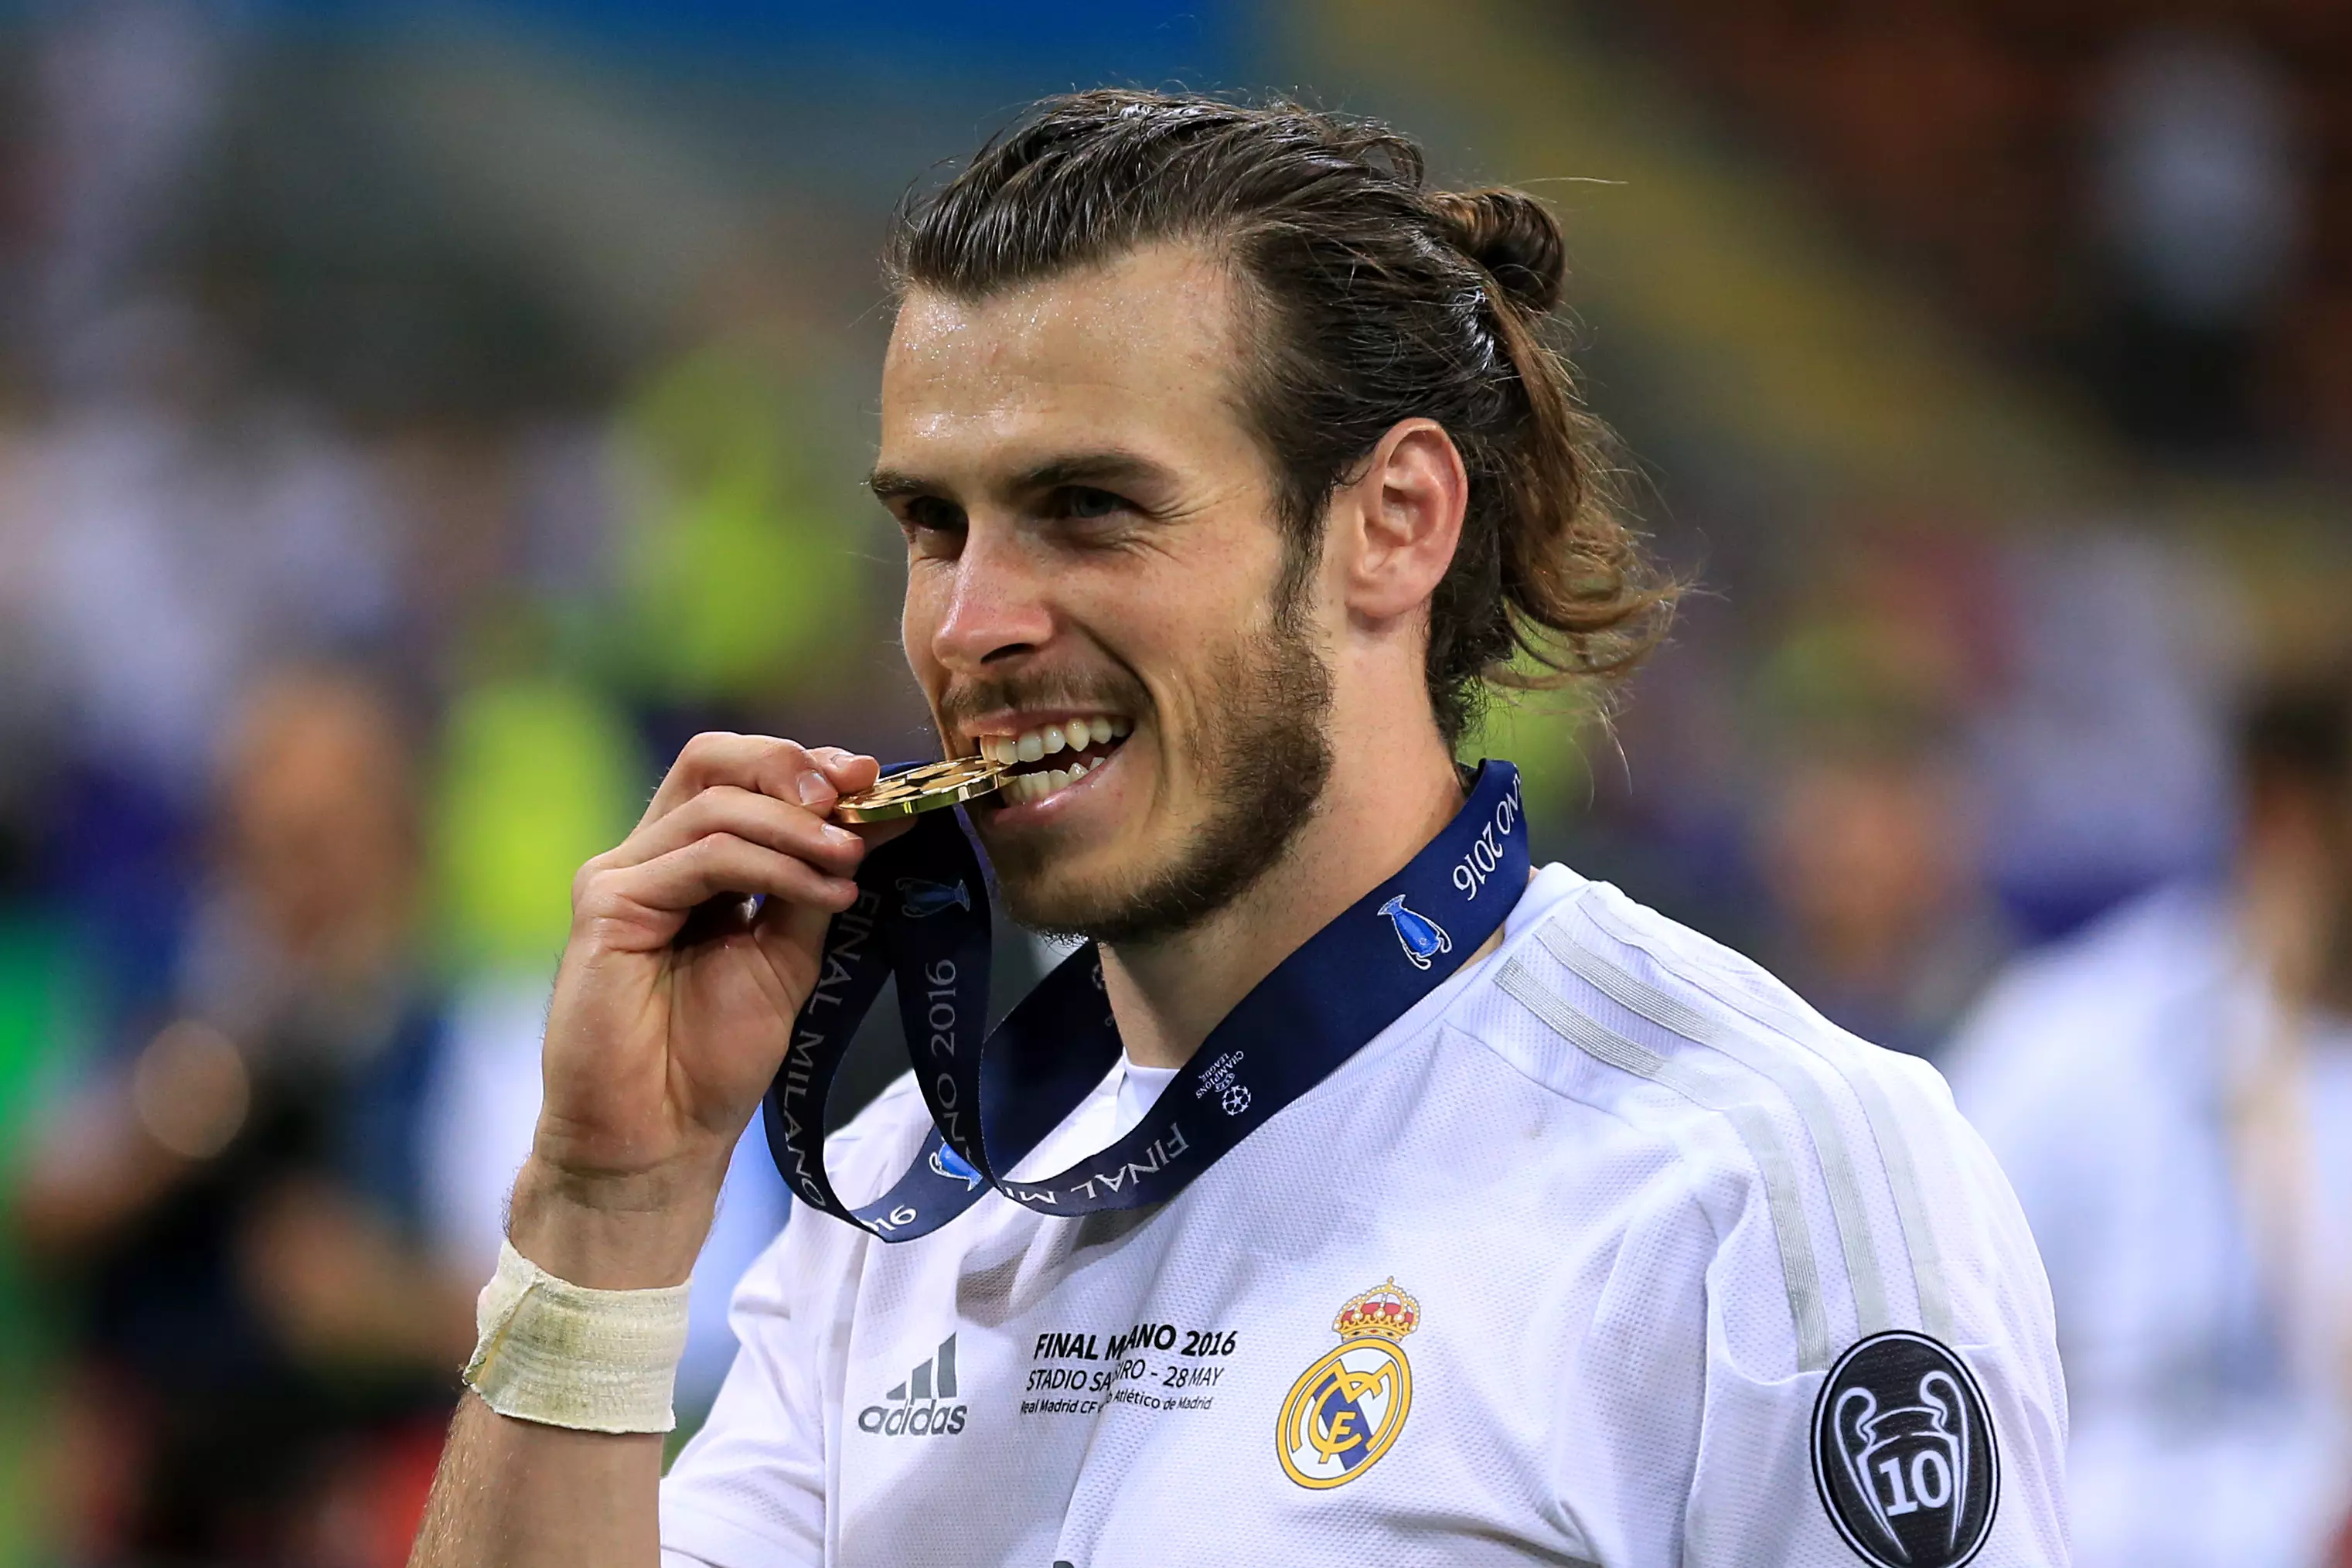 Bale has had some very good times at Real. Image: PA Images